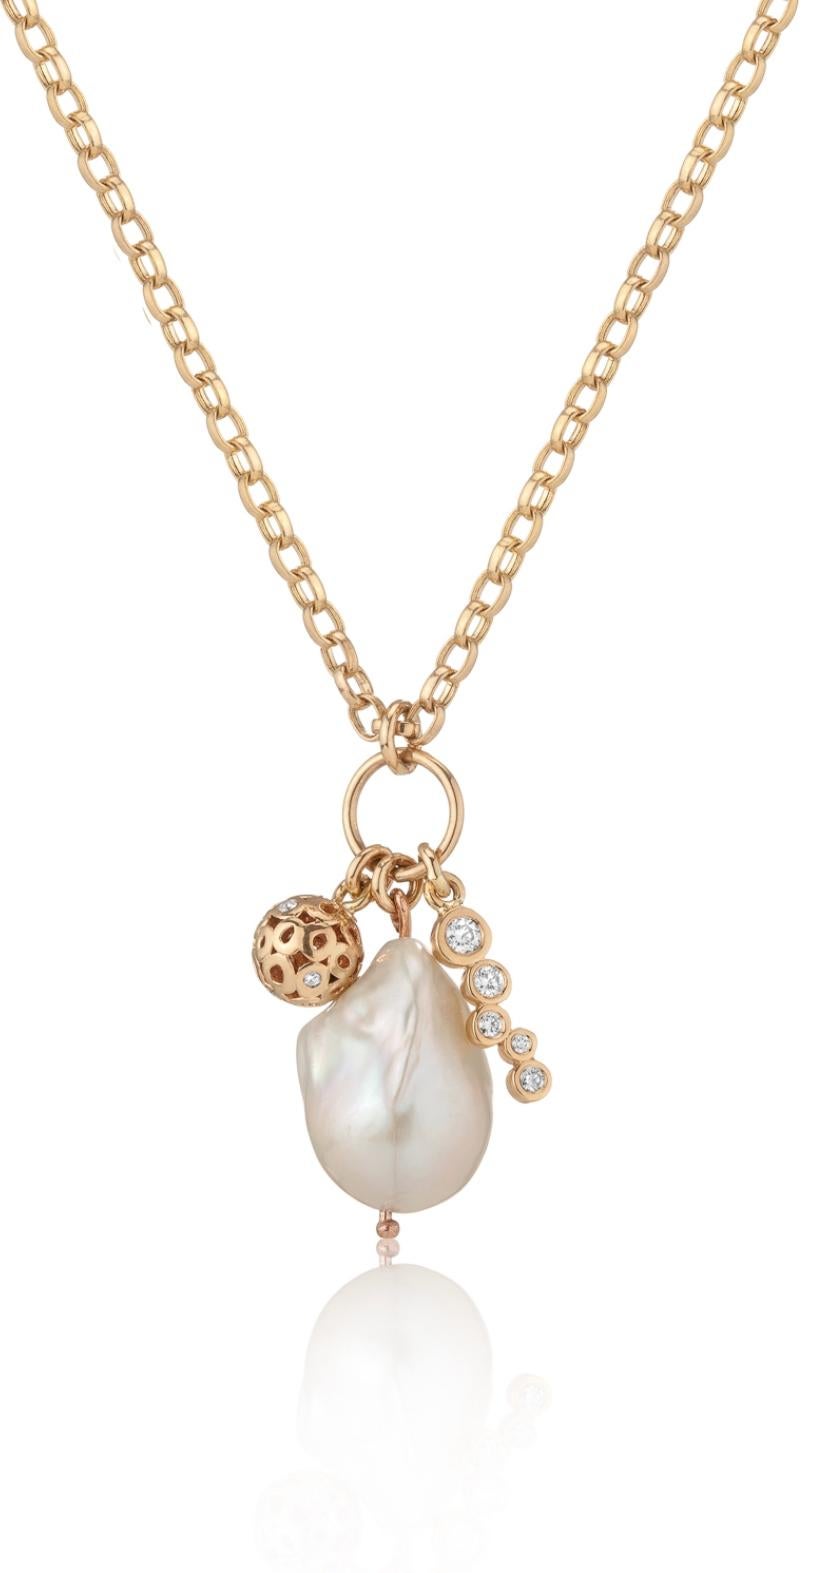 Round Cut Hi June Parker Gold Freshwater Baroque Pearl Charm Necklace 0.37 Carat Diamond  For Sale